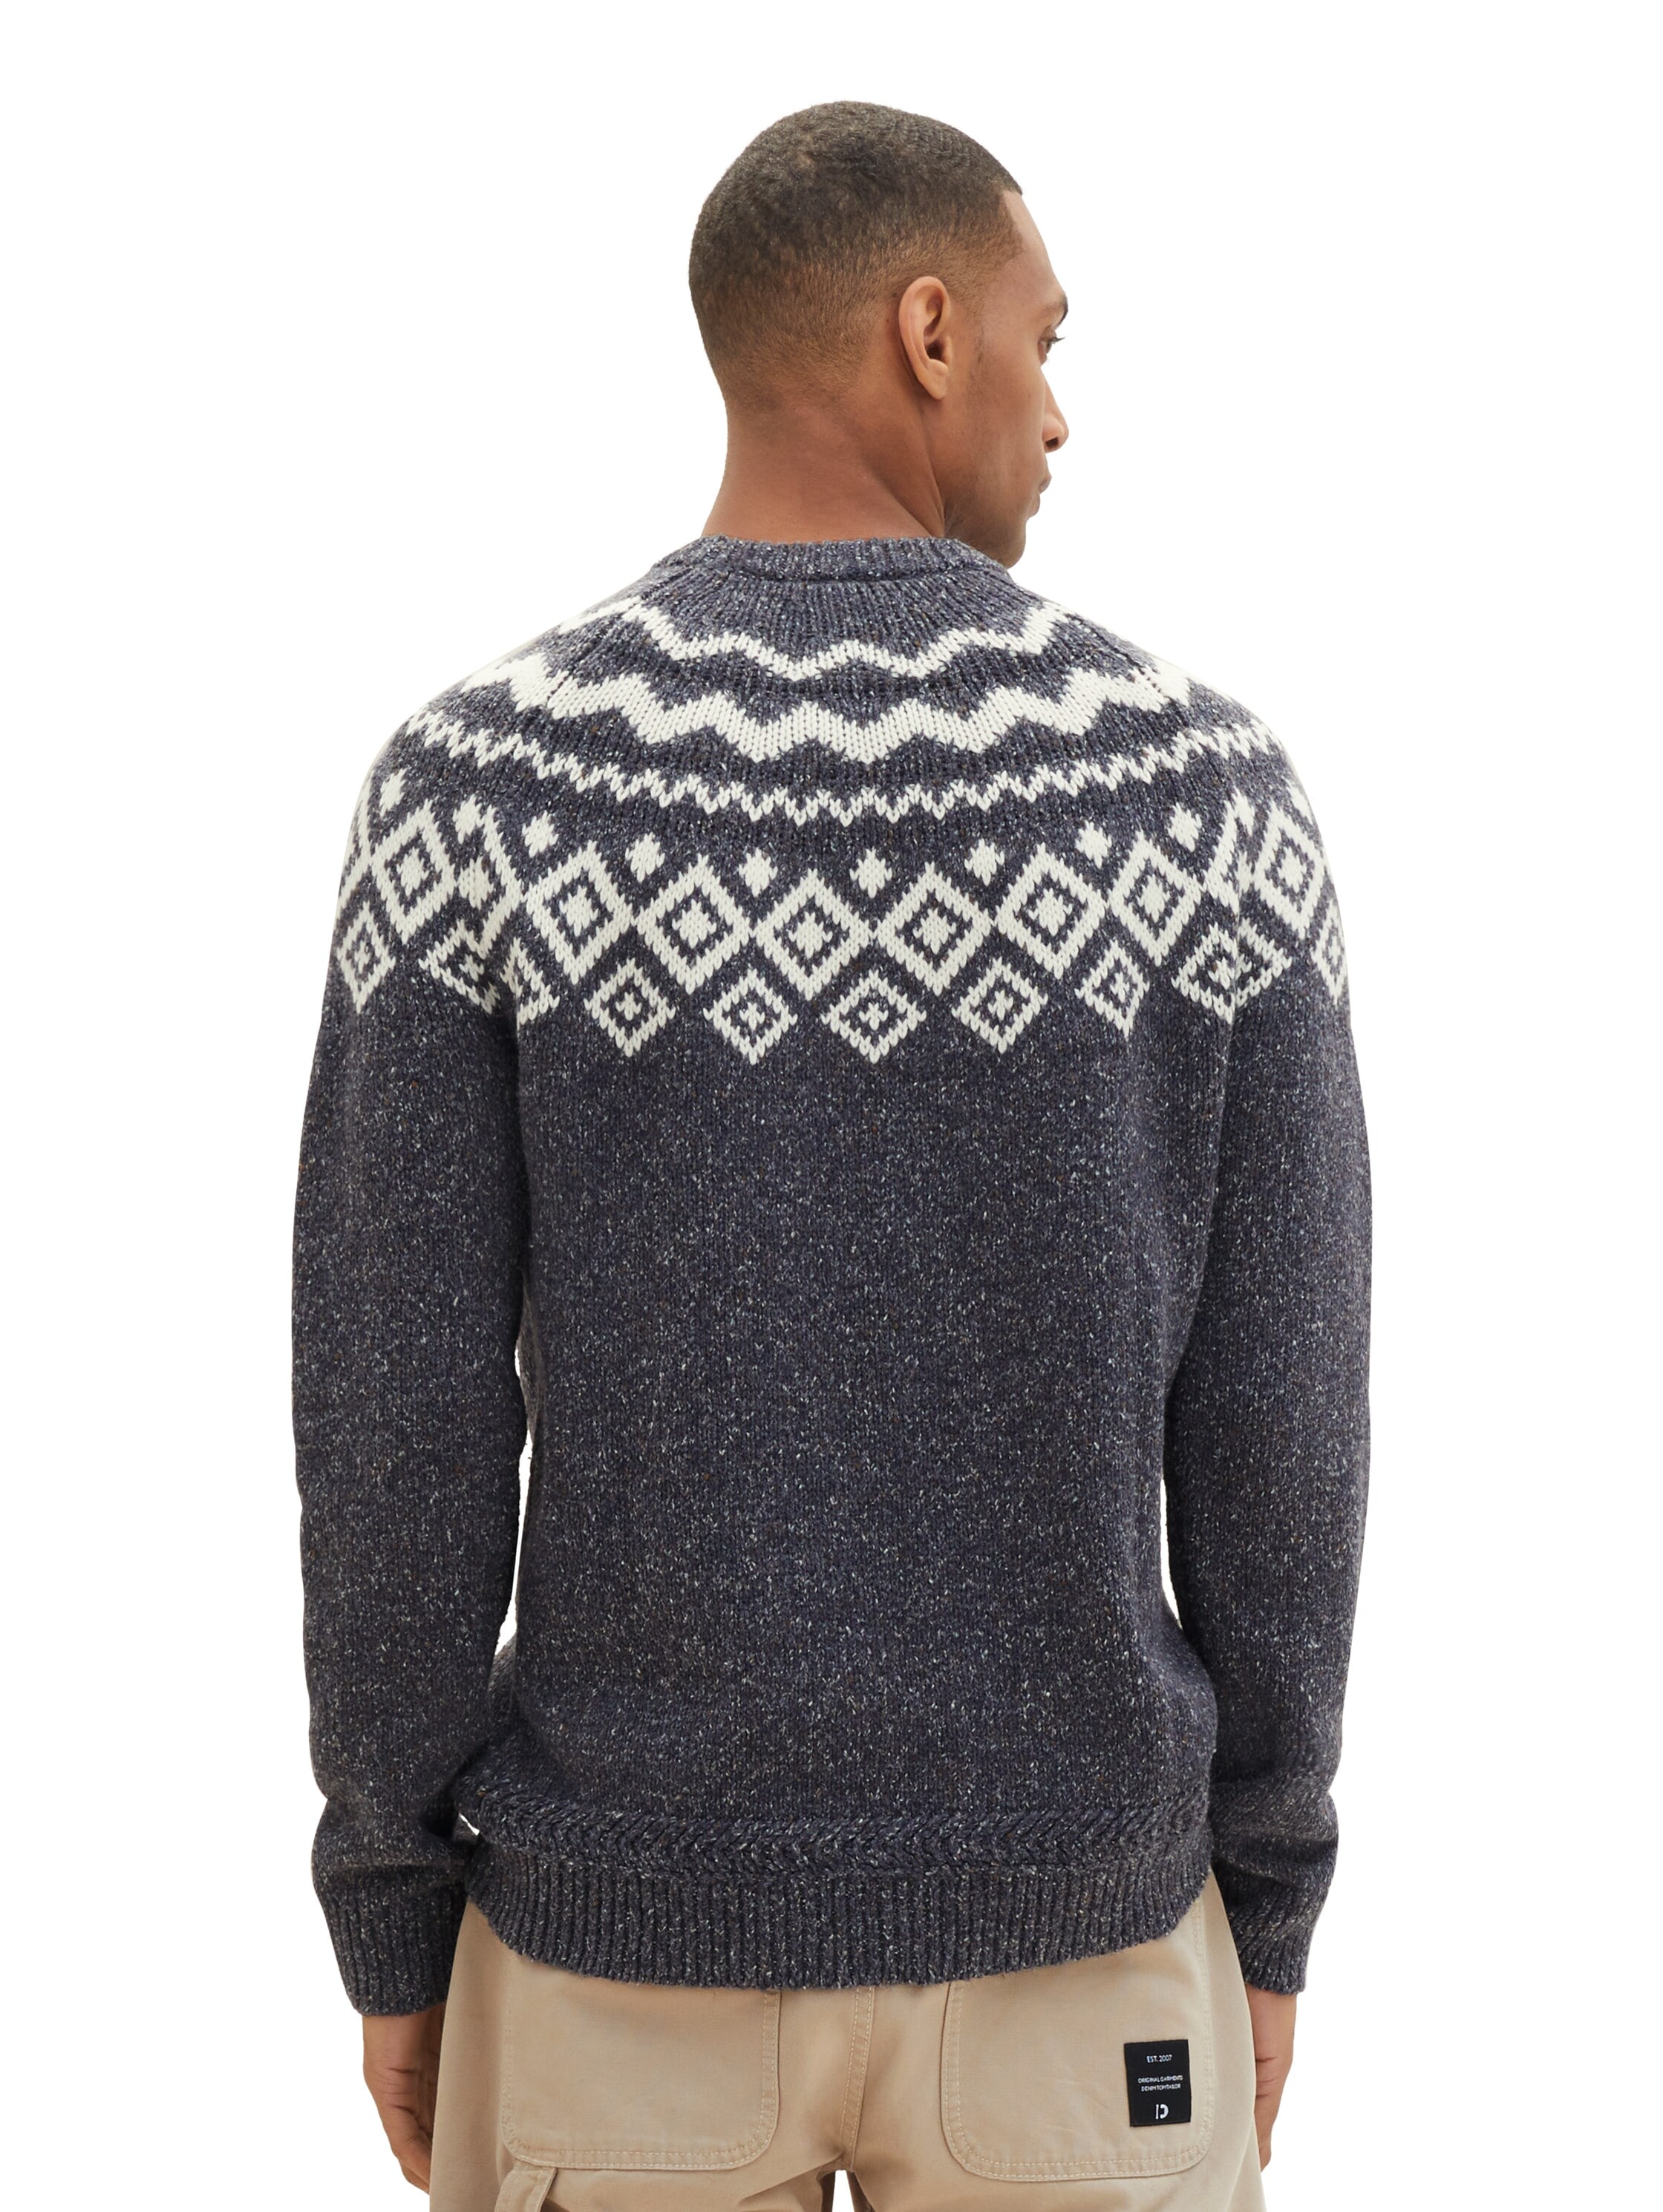 TOM TAILOR Strickpullover, mit Twotone-Muster